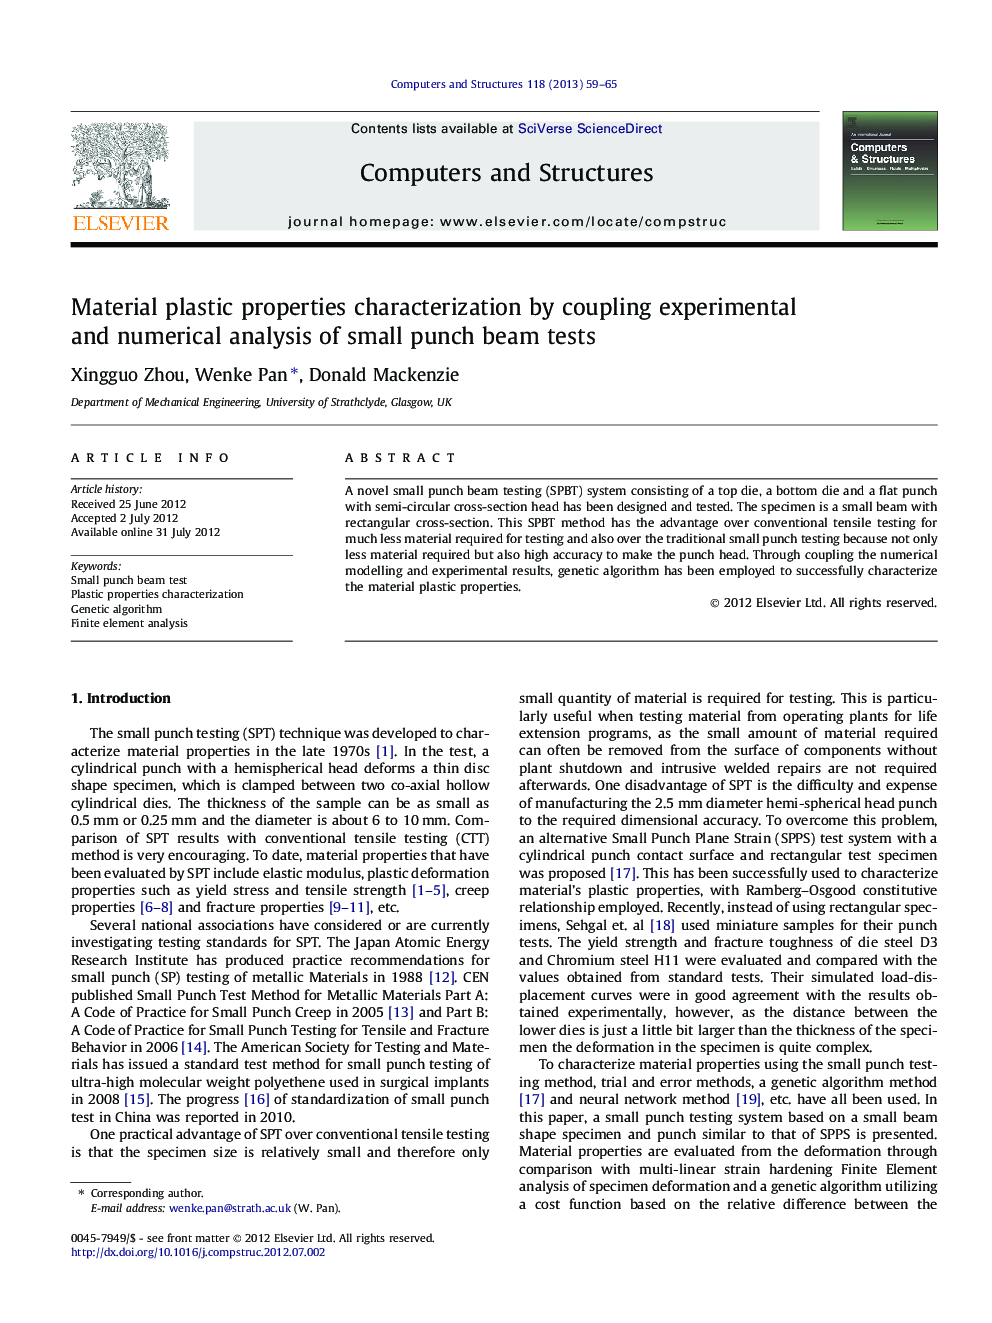 Material plastic properties characterization by coupling experimental and numerical analysis of small punch beam tests